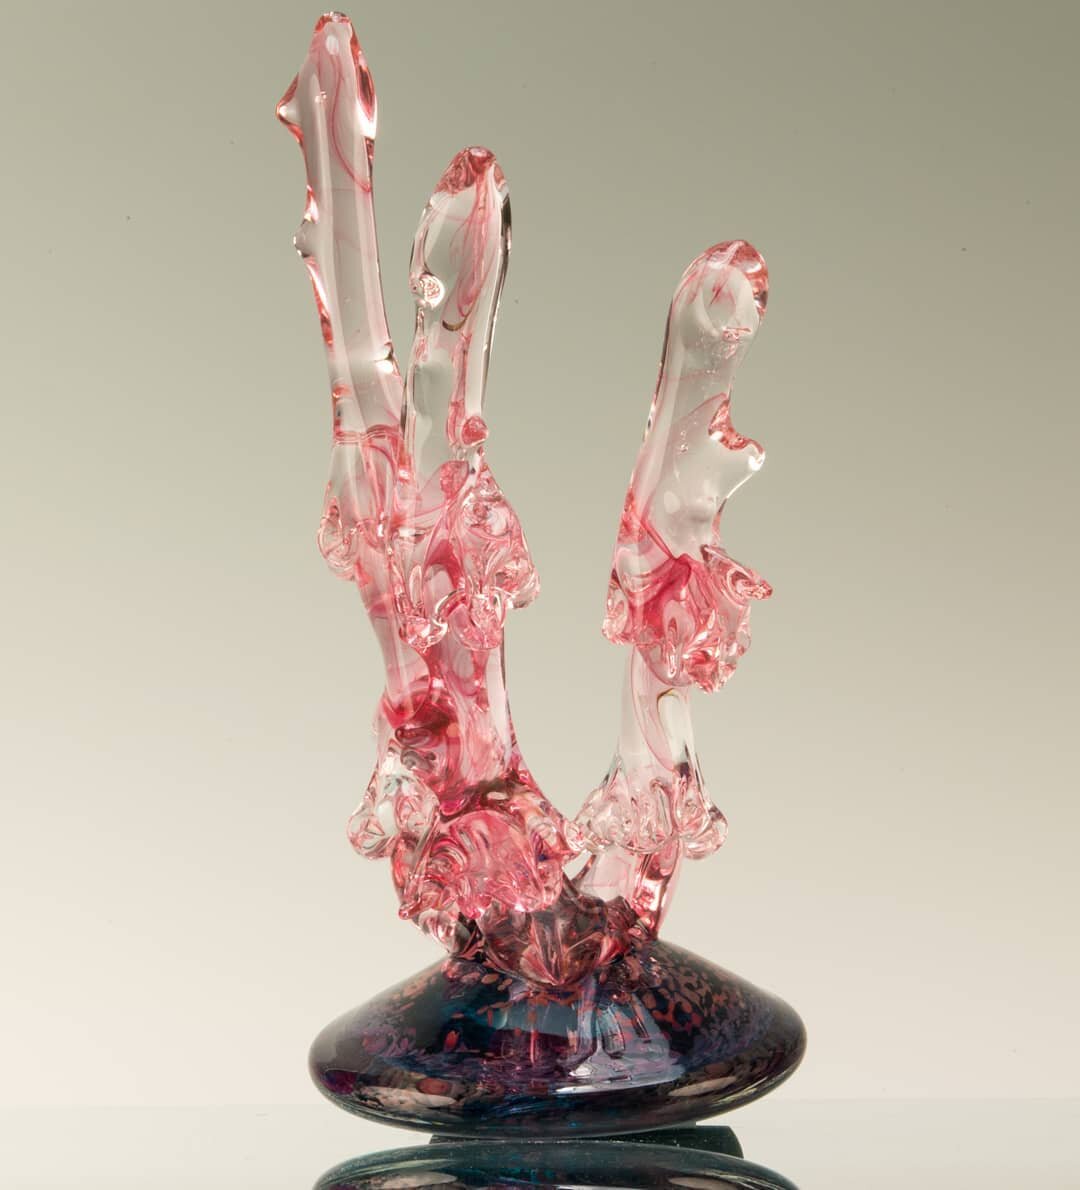 Reef-inspired coral sculpture made with gold-ruby glass. About 10 inches tall. DM to purchase. 🐚 Photo by Brian Lewis #glassblowing #glass #coral #sculpture